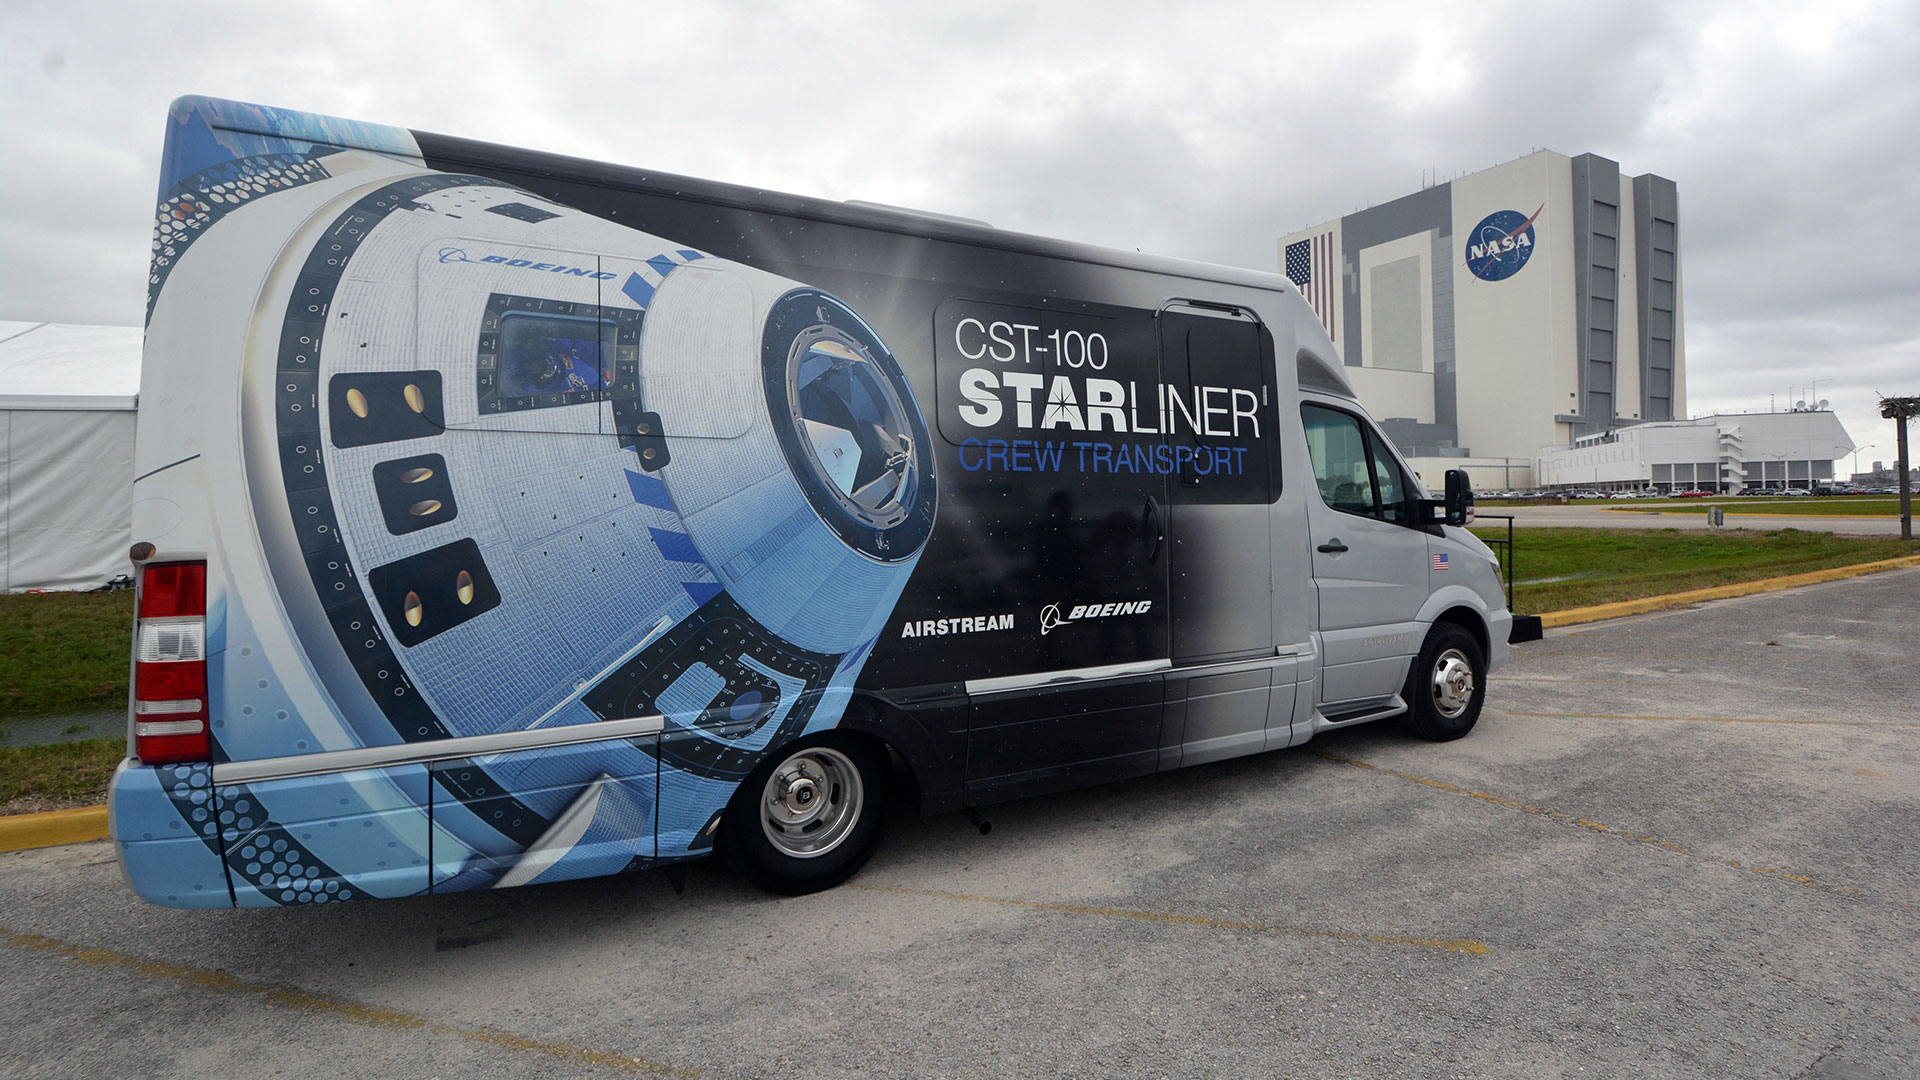 Their other vehicle is the Starliner: Boeing's 1st crew to ride Astrovan II to the launch pad